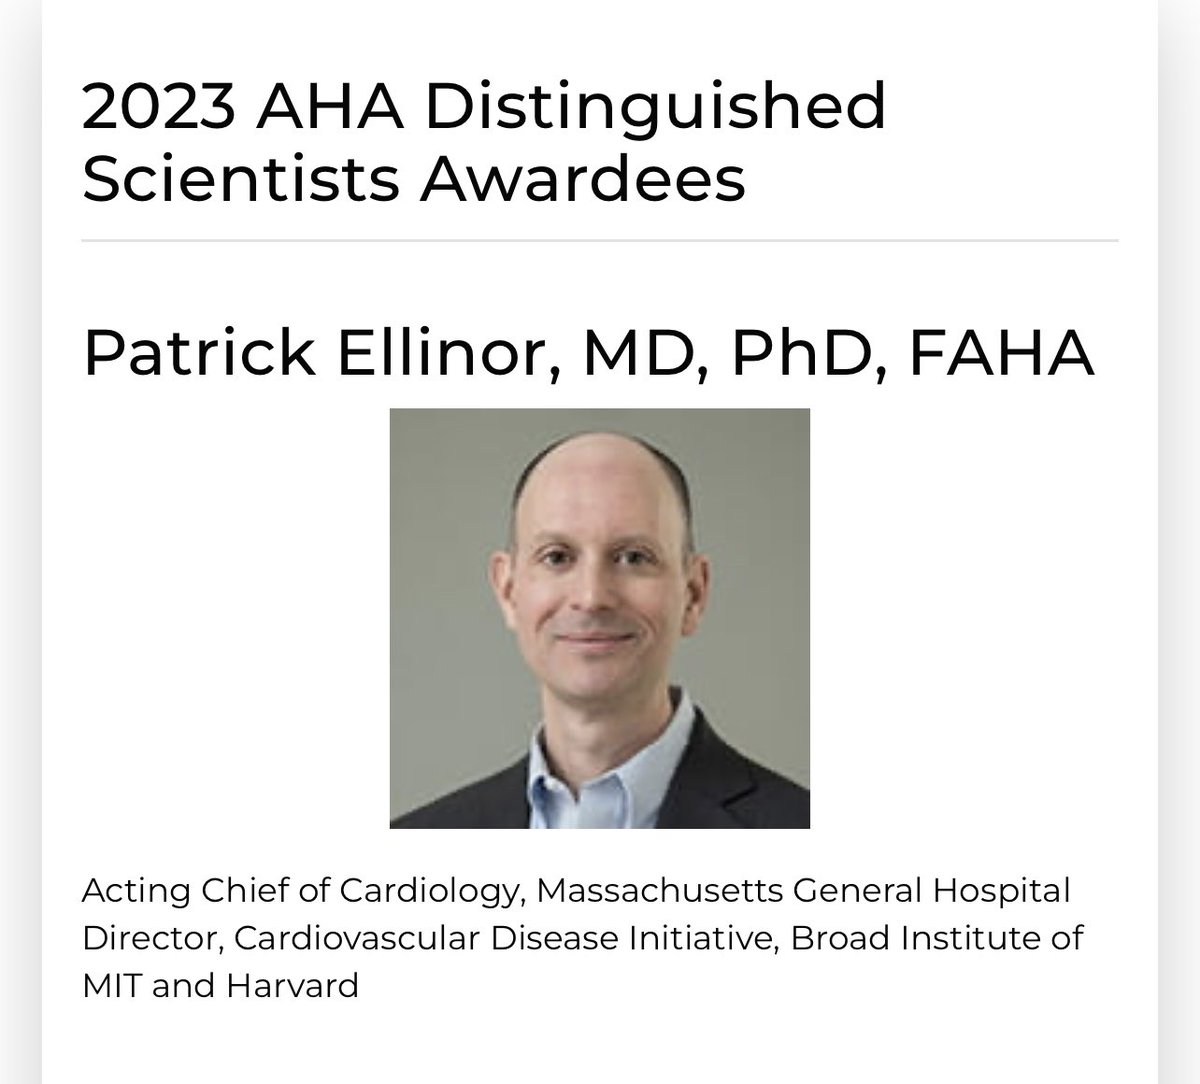 Congratulations @patrick_ellinor on receiving the @American_Heart highest scientific honor. Your contributions to understanding atrial fibrillation have been spectacular! Add to that clinical leadership, mentorship of trainees, and humility. Kudos! professional.heart.org/en/partners/di…